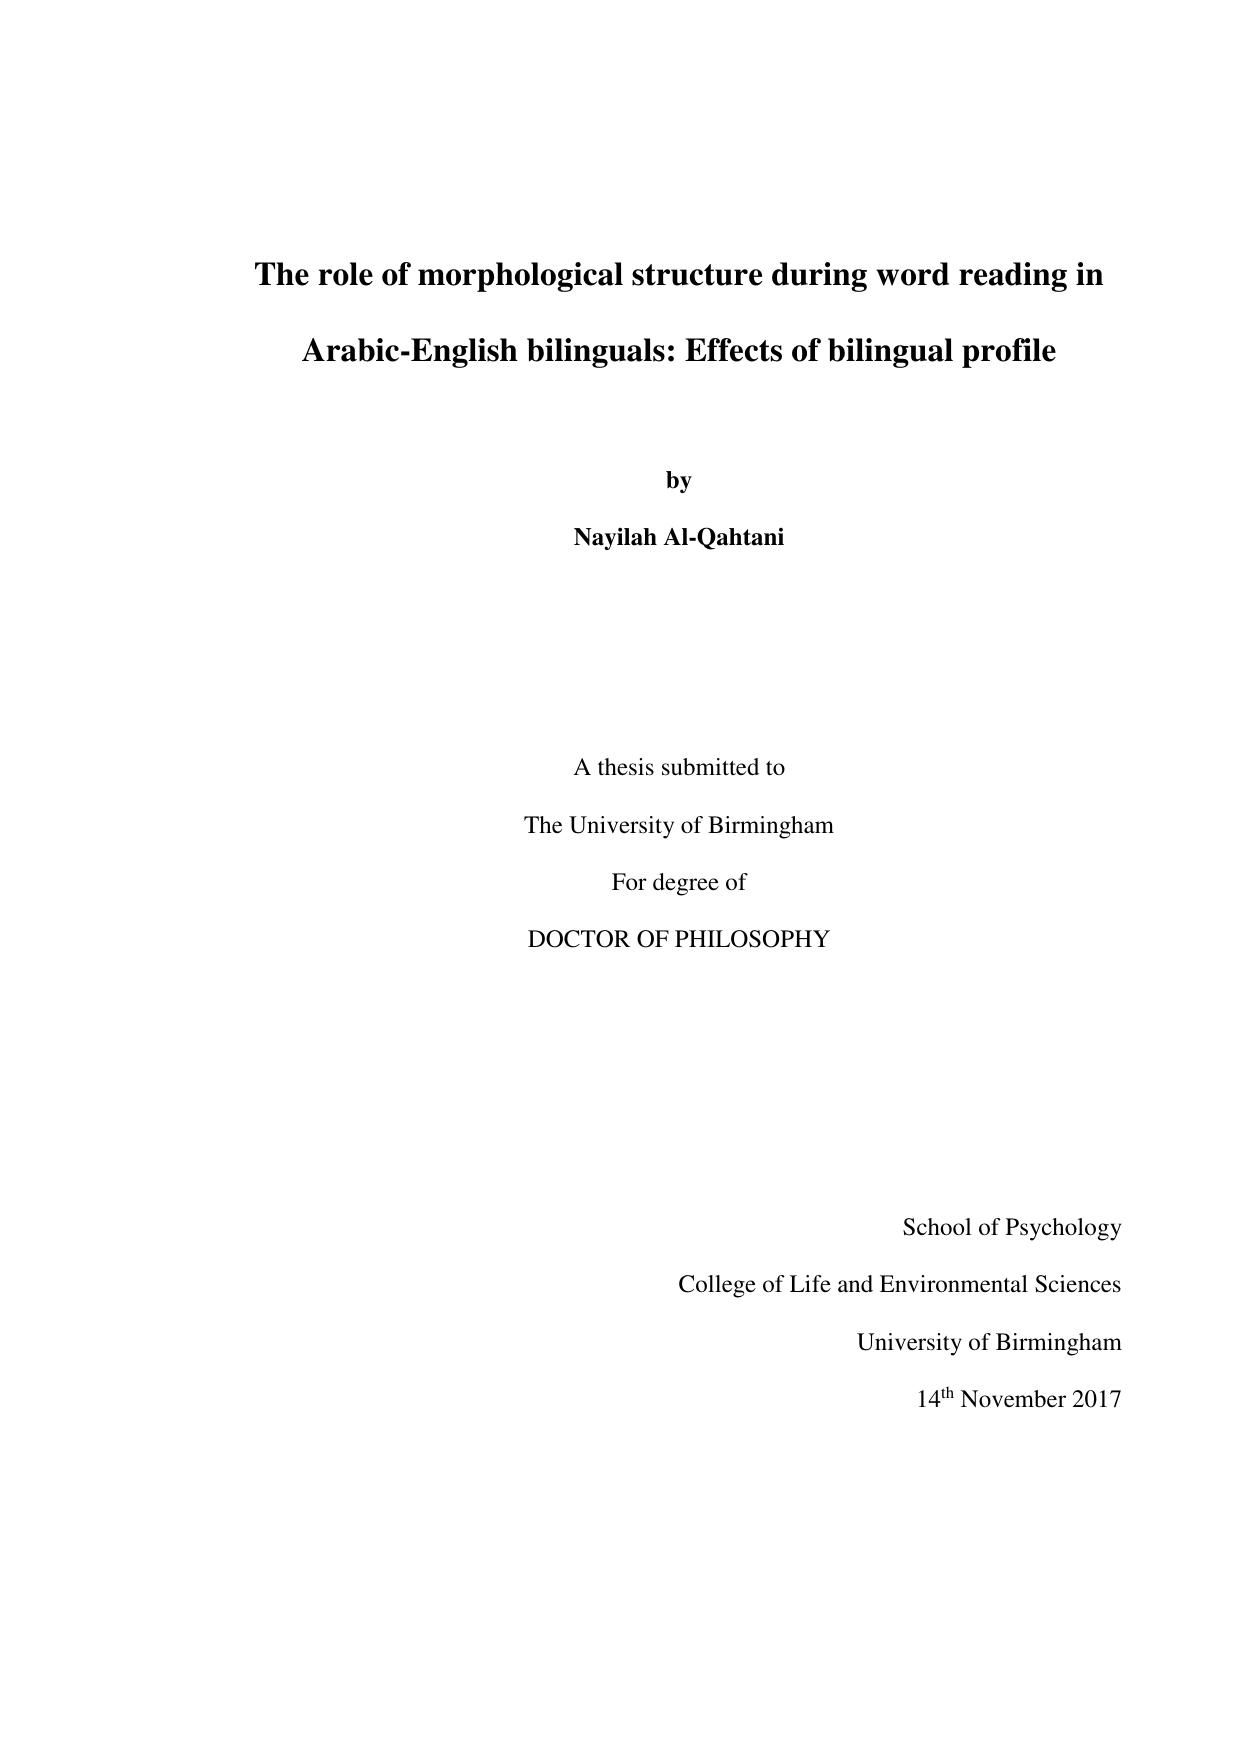 The role of morphological structure during word reading in Arabic-English bilinguals: effects of bilingual profile